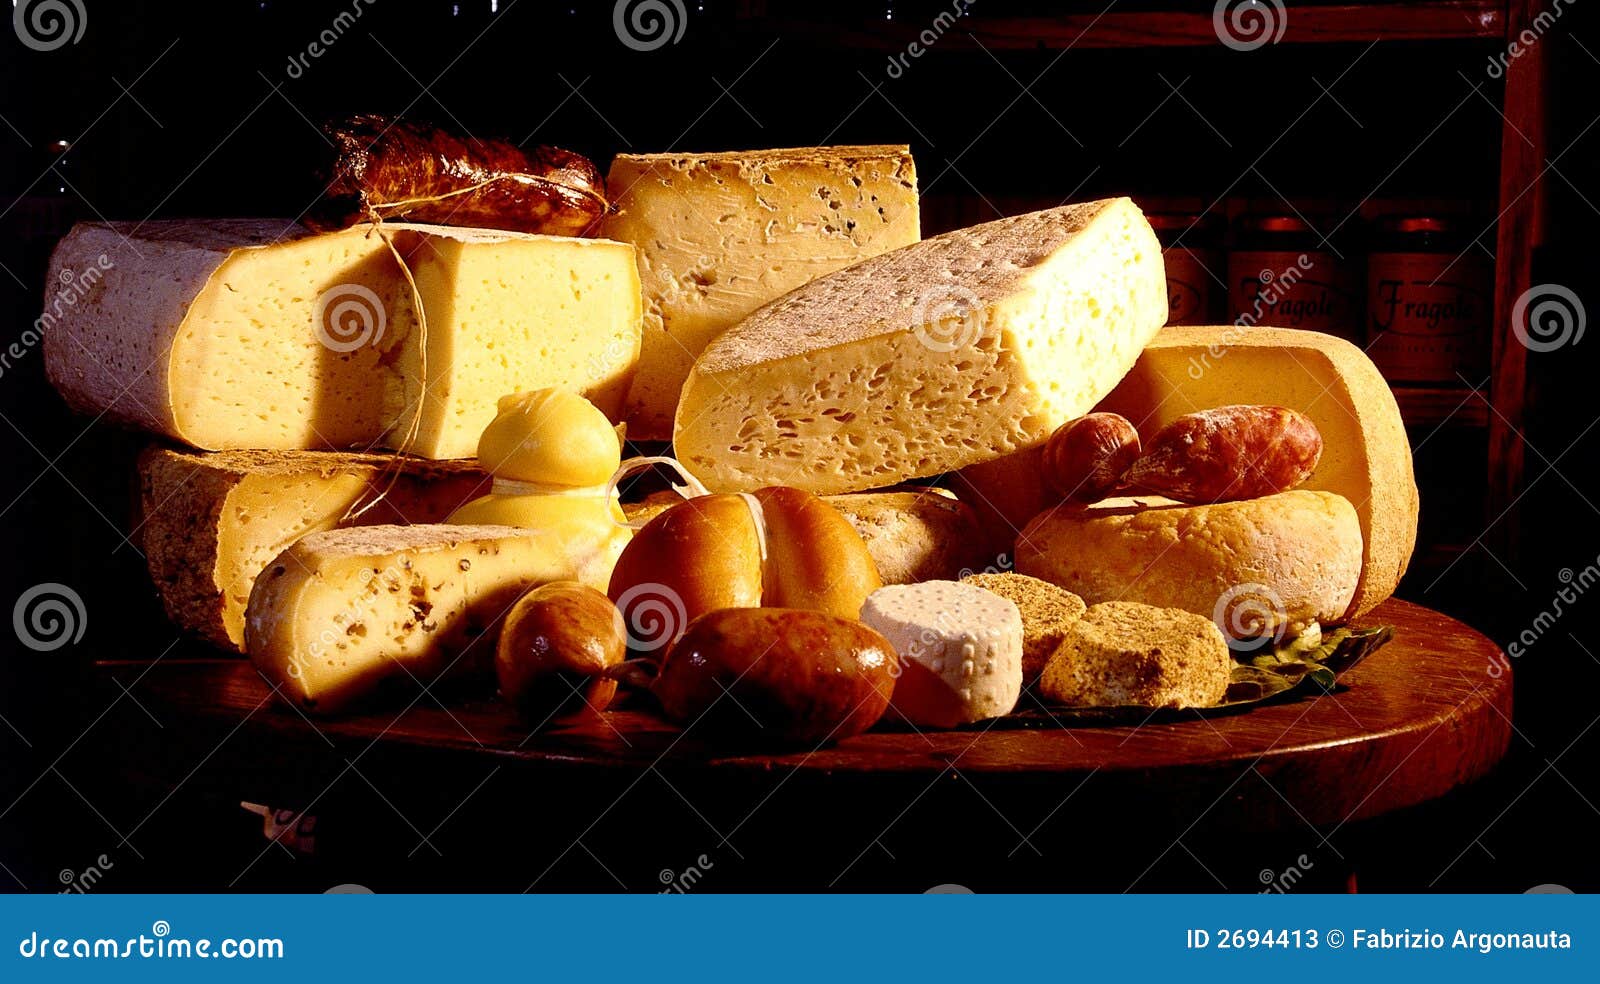 cheese and sausages